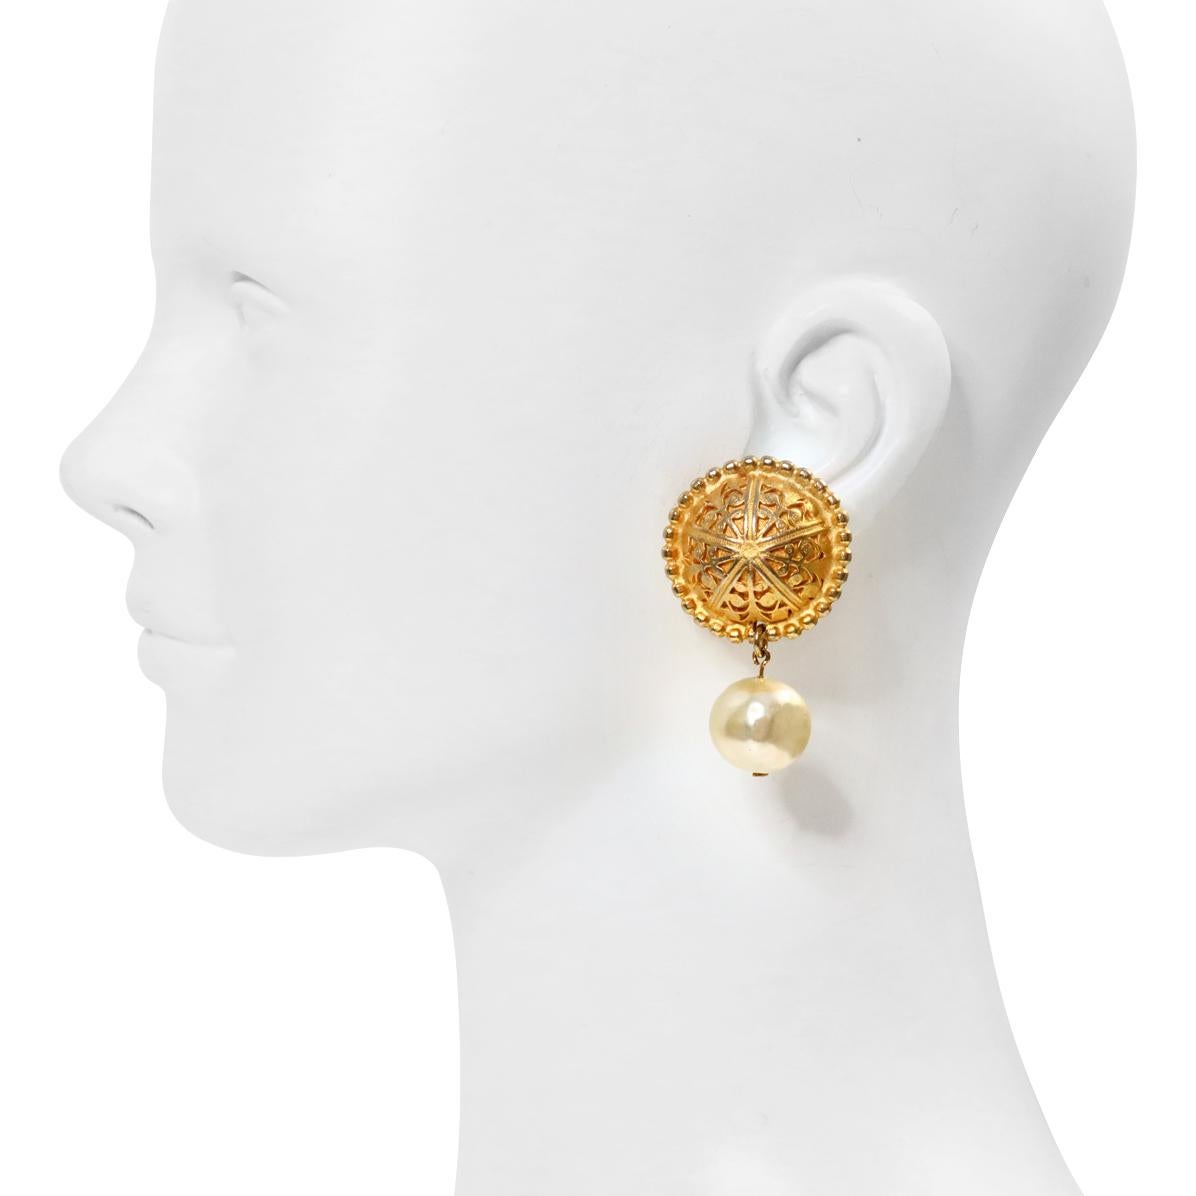 Vintage EP Gold Byzantine with Faux Dangling Pearl Earrings Circa 1980s For Sale 1